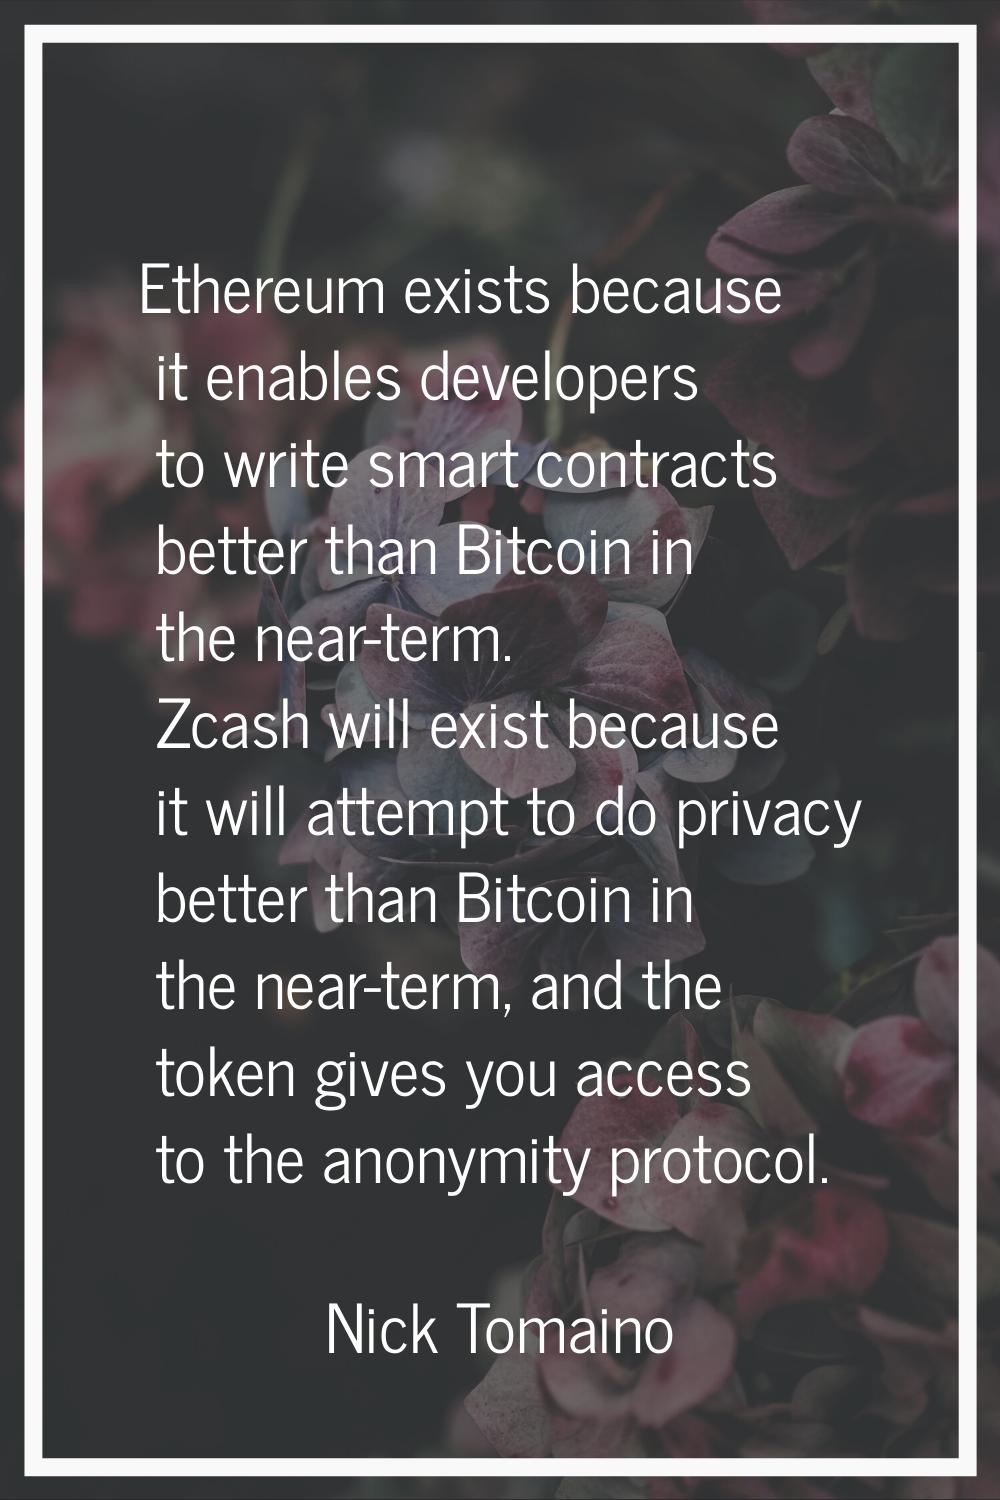 Ethereum exists because it enables developers to write smart contracts better than Bitcoin in the n